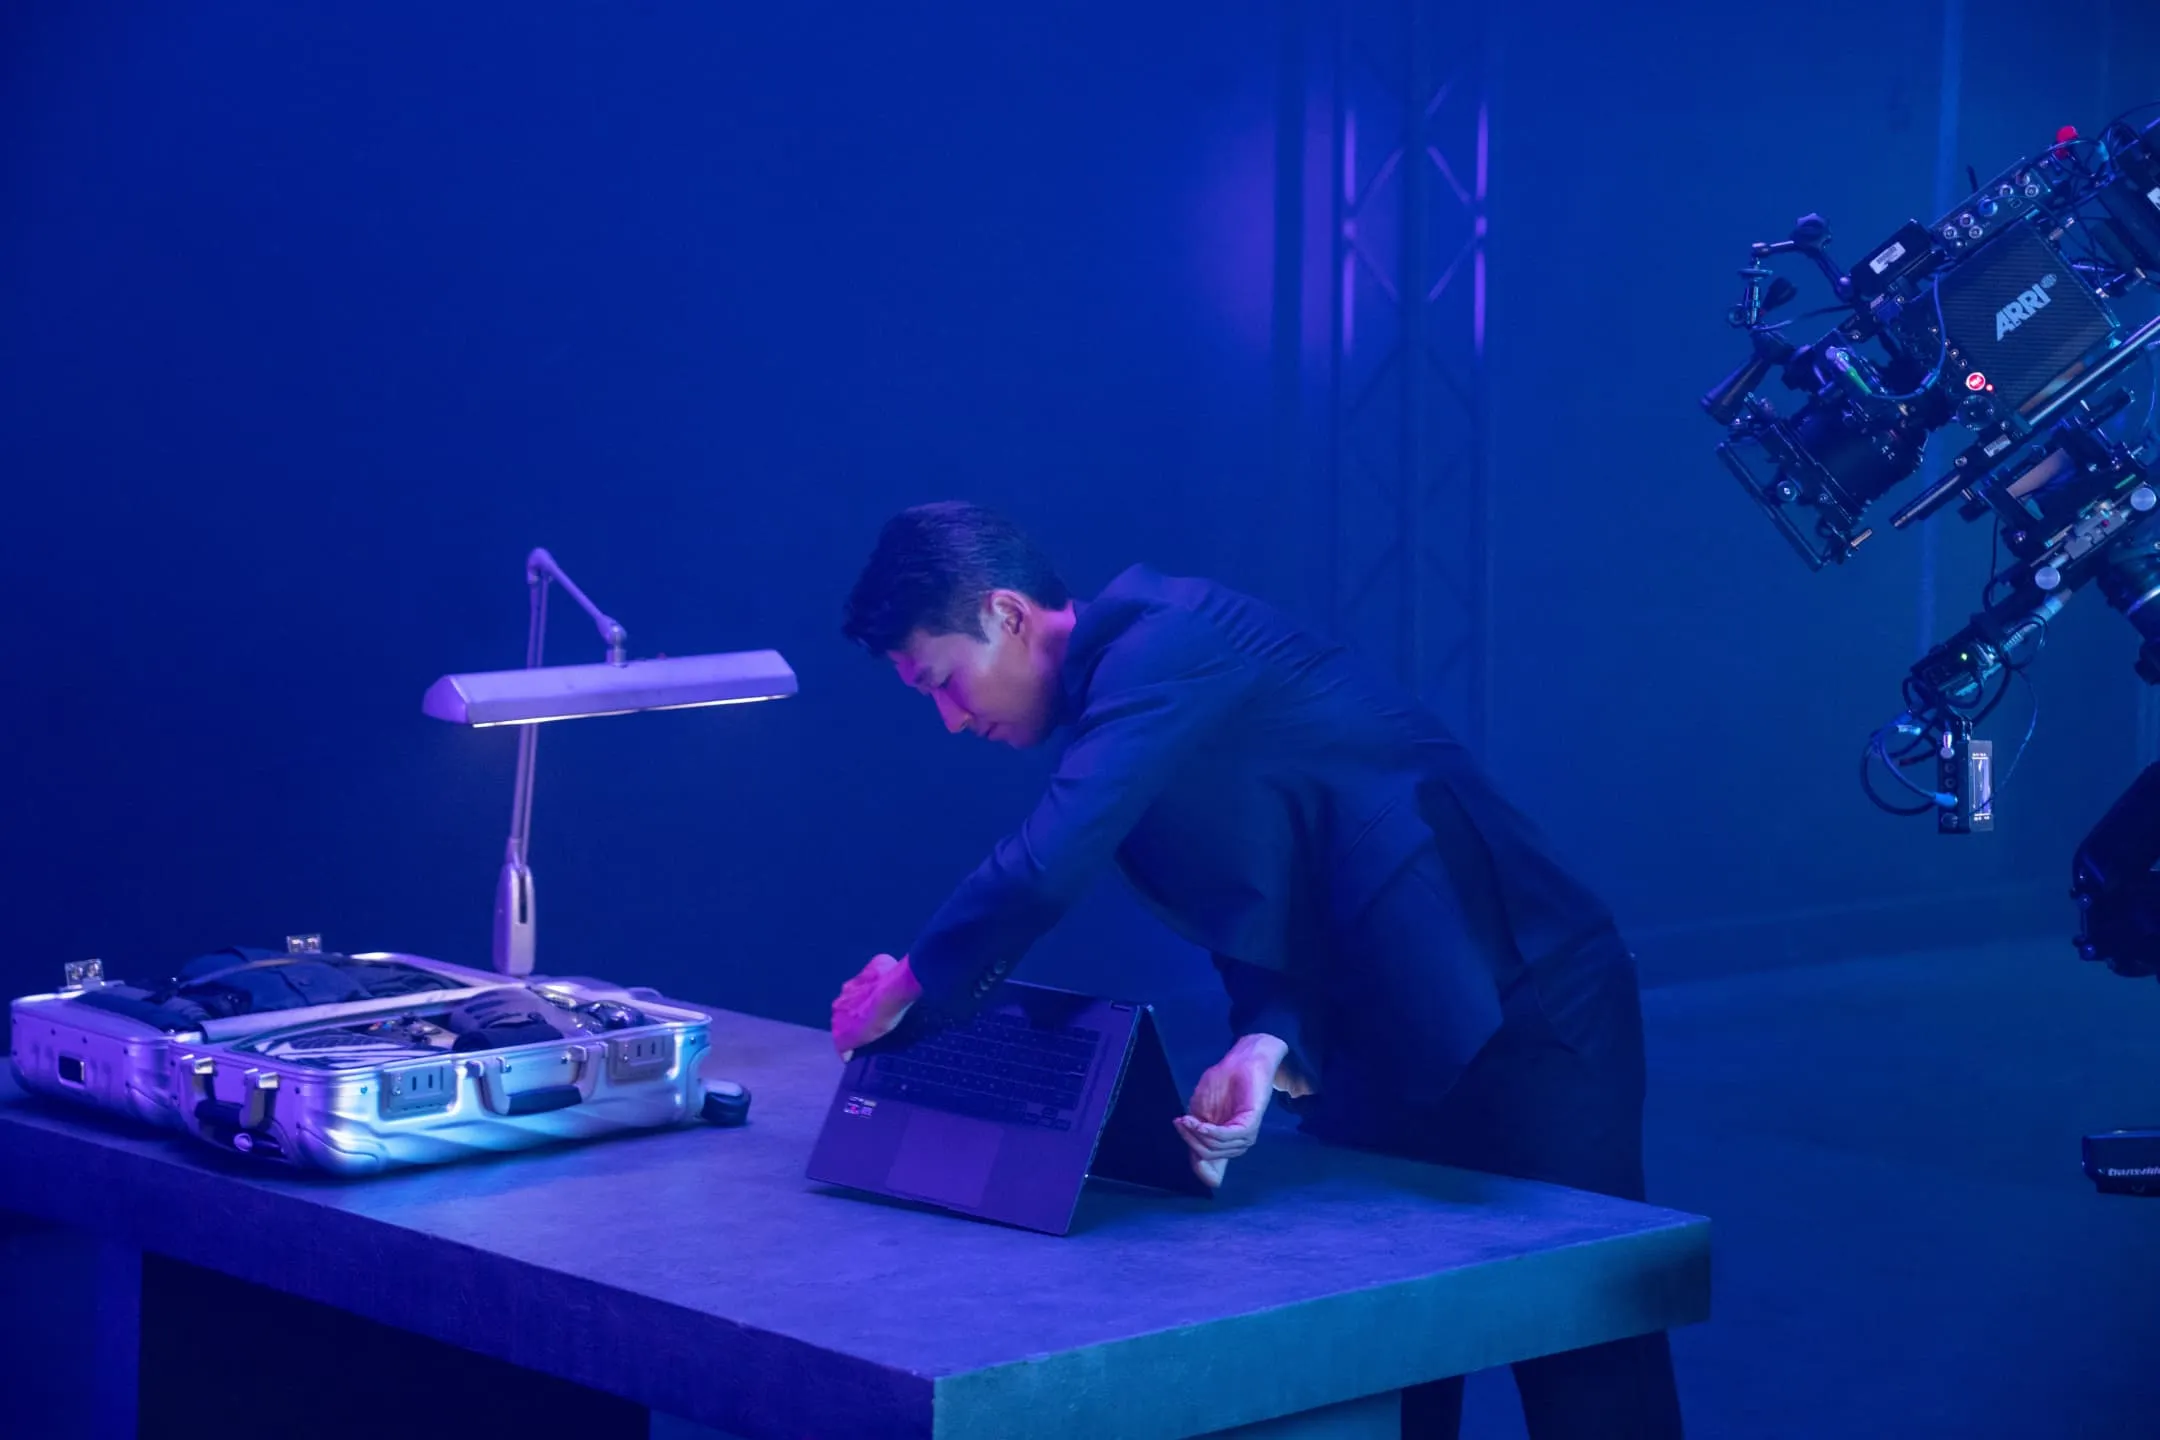 Son Heung-Min putting the Flow X16 laptop on a desk in tent mode.